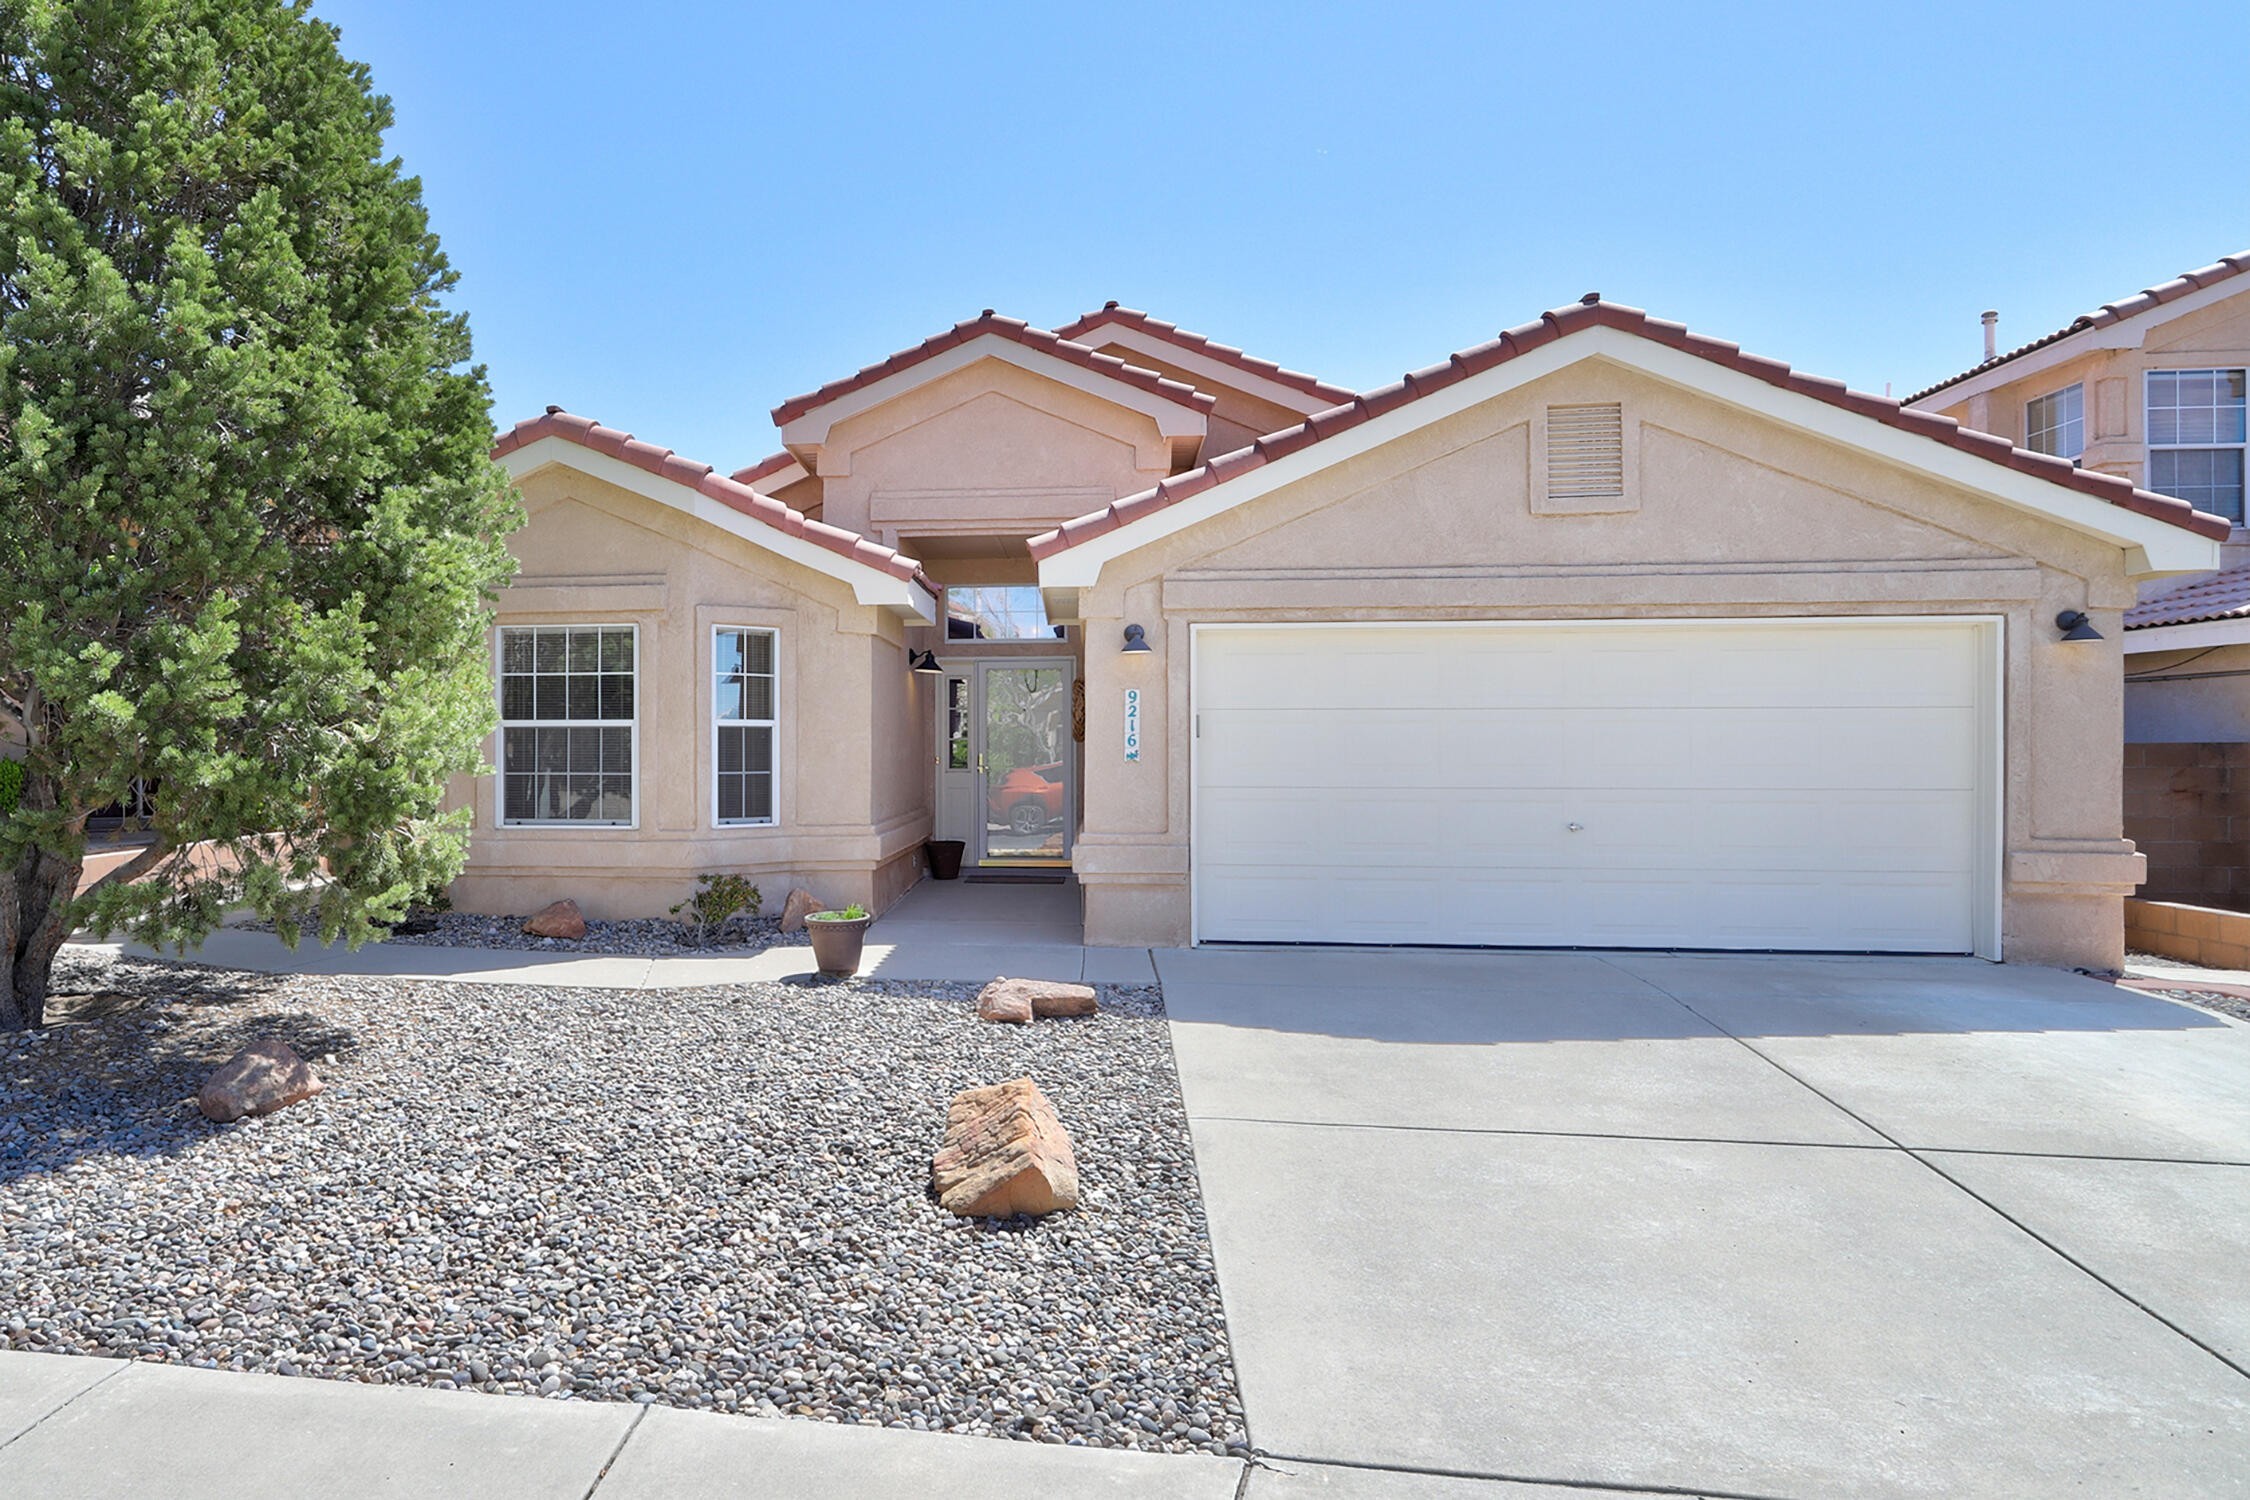 1. 9216 Cactus Trail Road NW